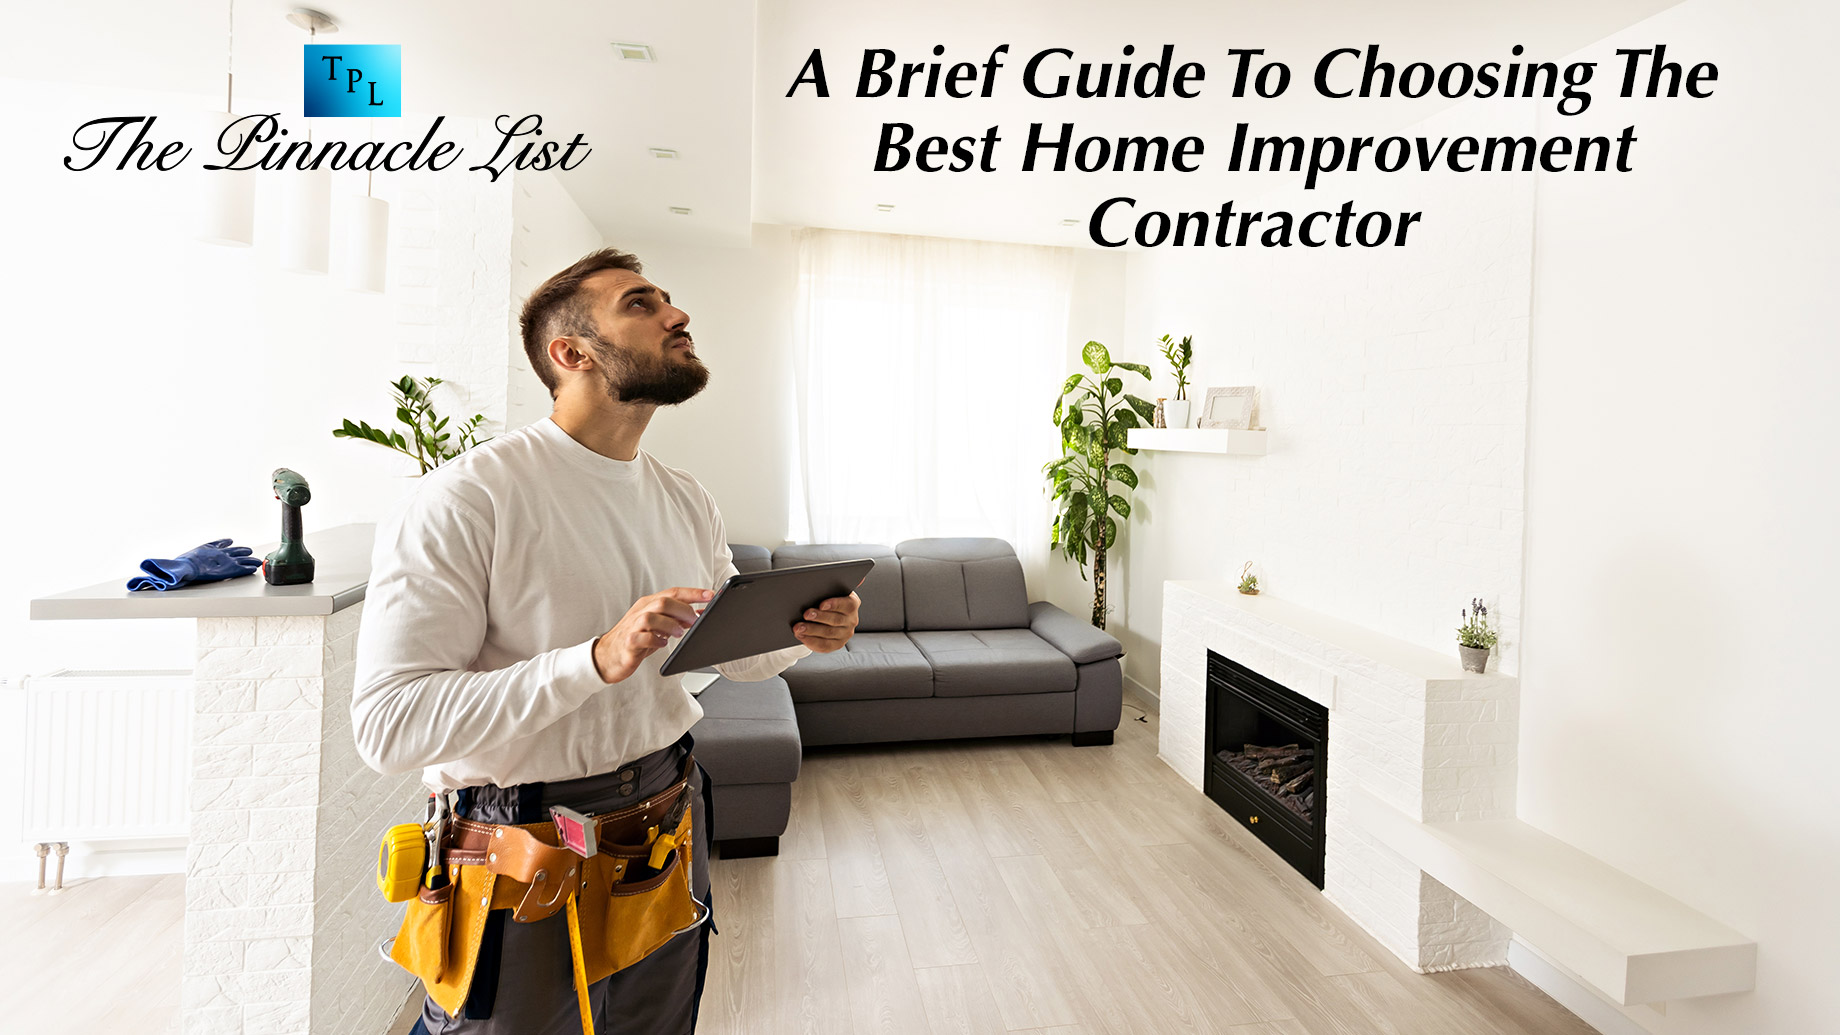 A Brief Guide To Choosing The Best Home Improvement Contractor